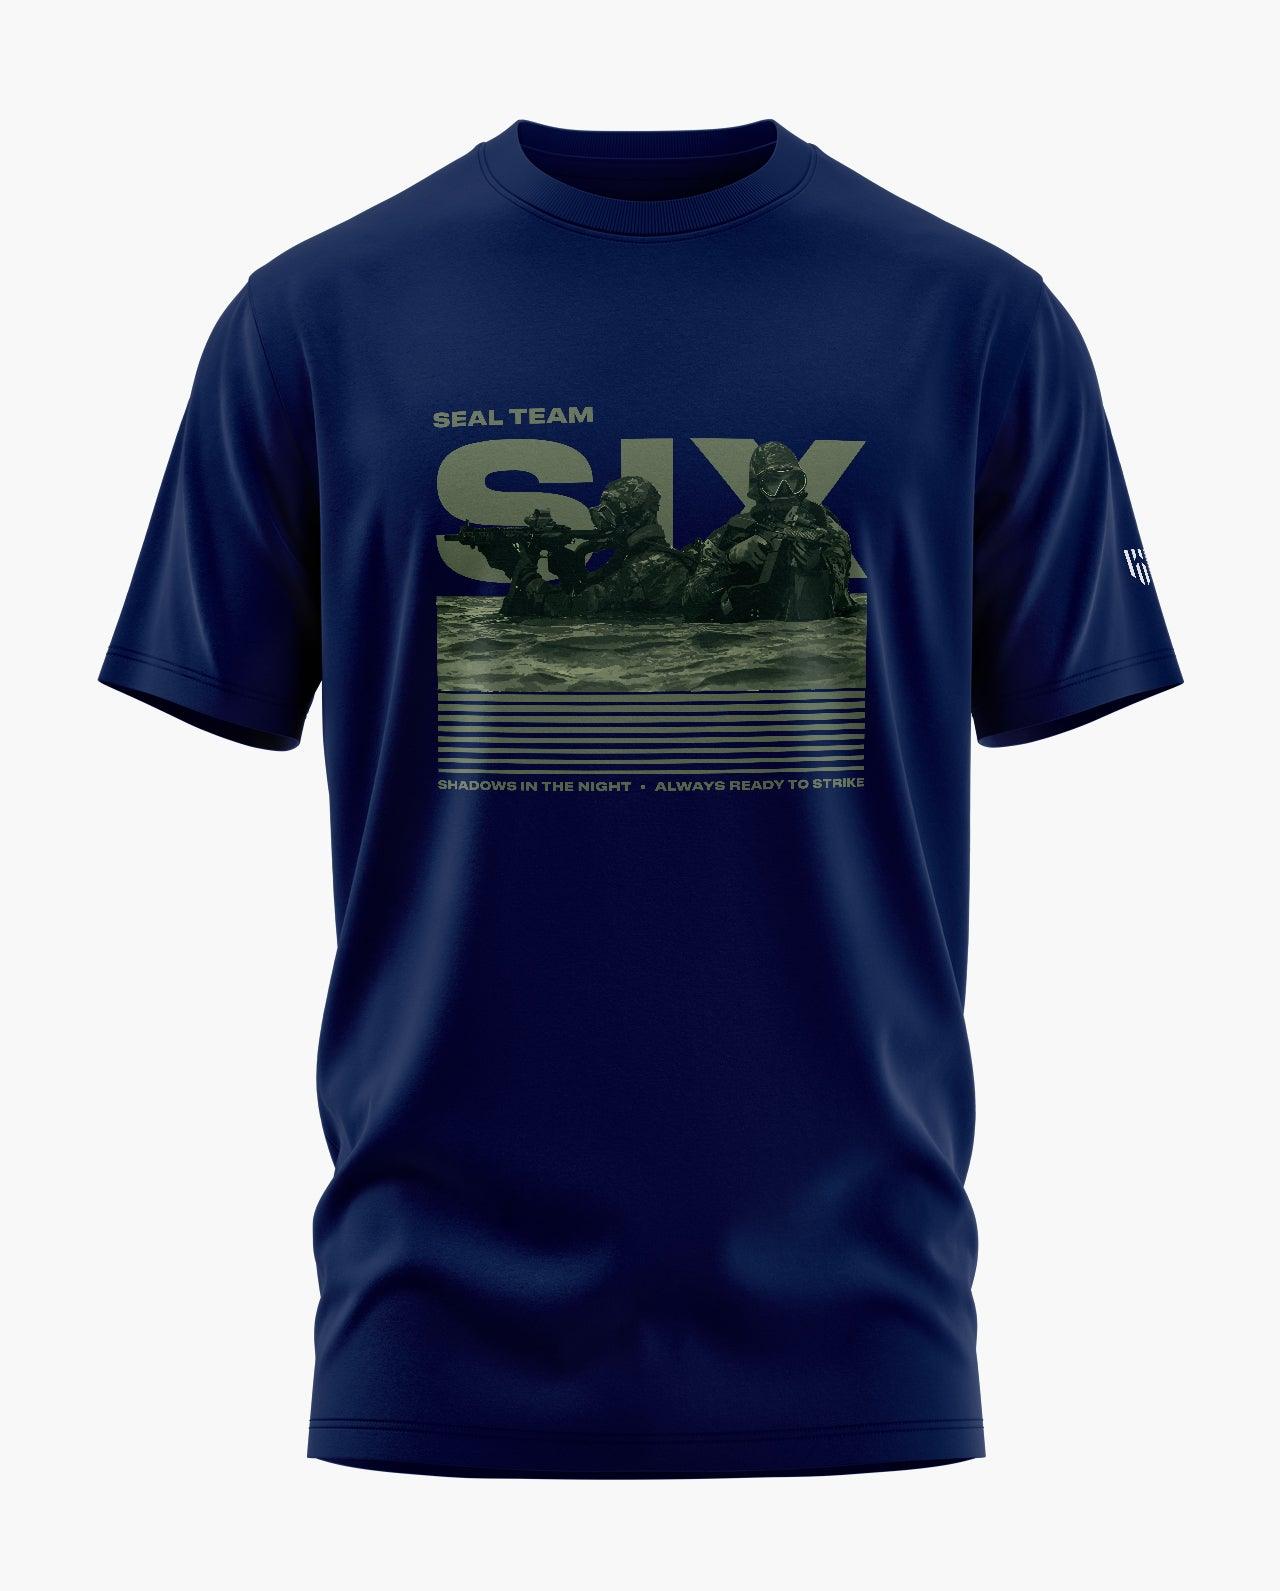 Seal Team Six T-Shirt exclusive at Aero Armour